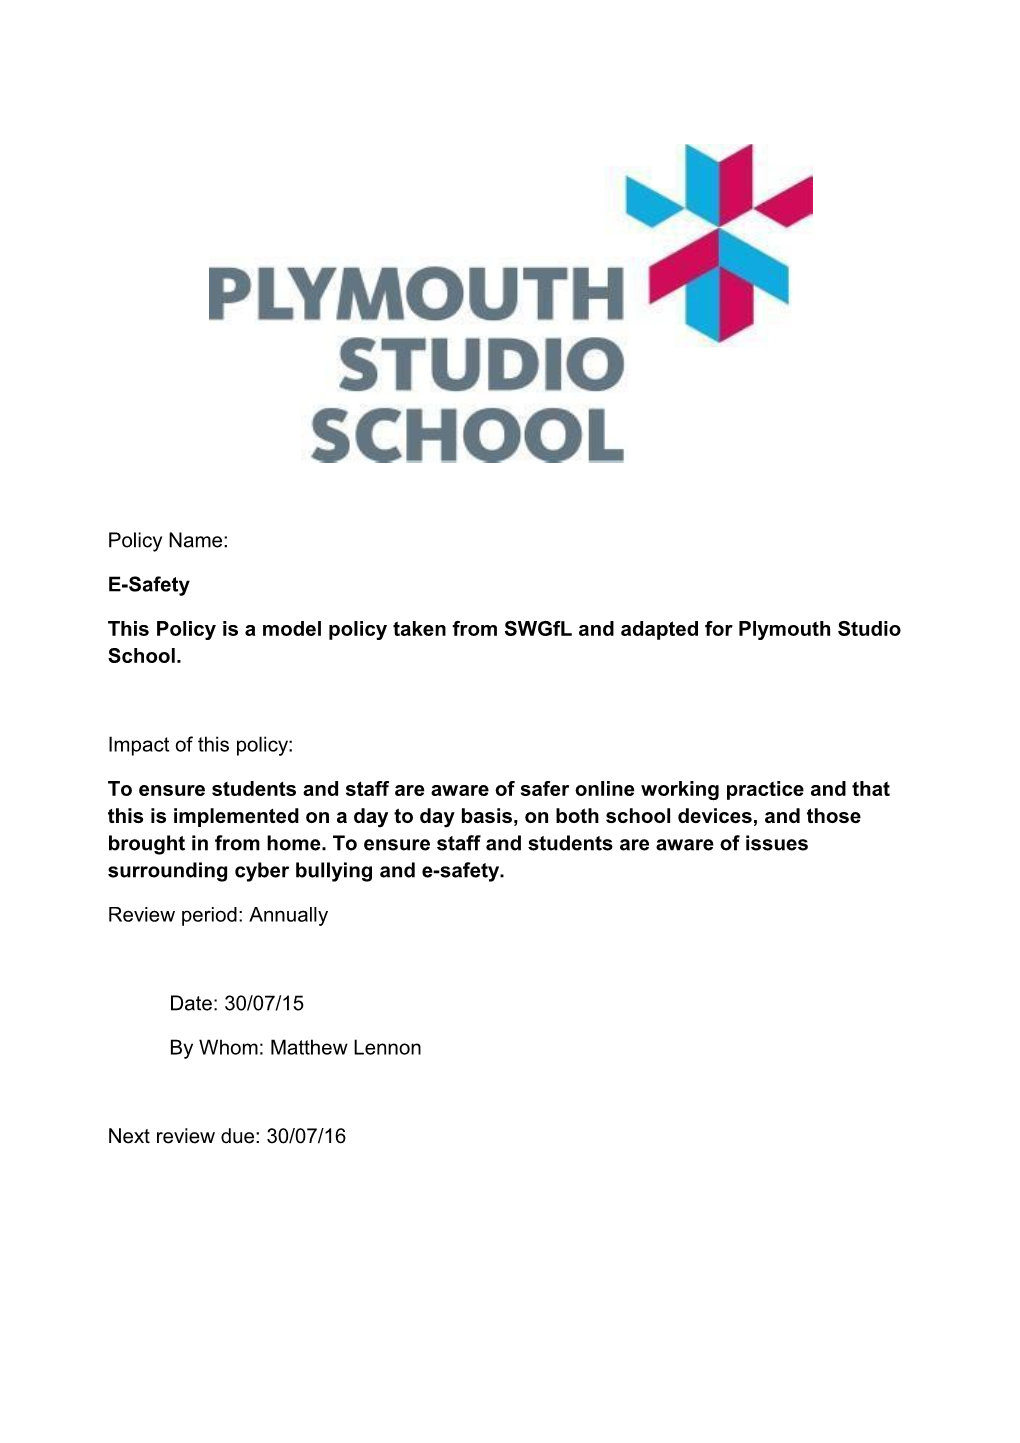 This Policy Is a Model Policy Taken from Swgfl and Adapted for Plymouth Studio School